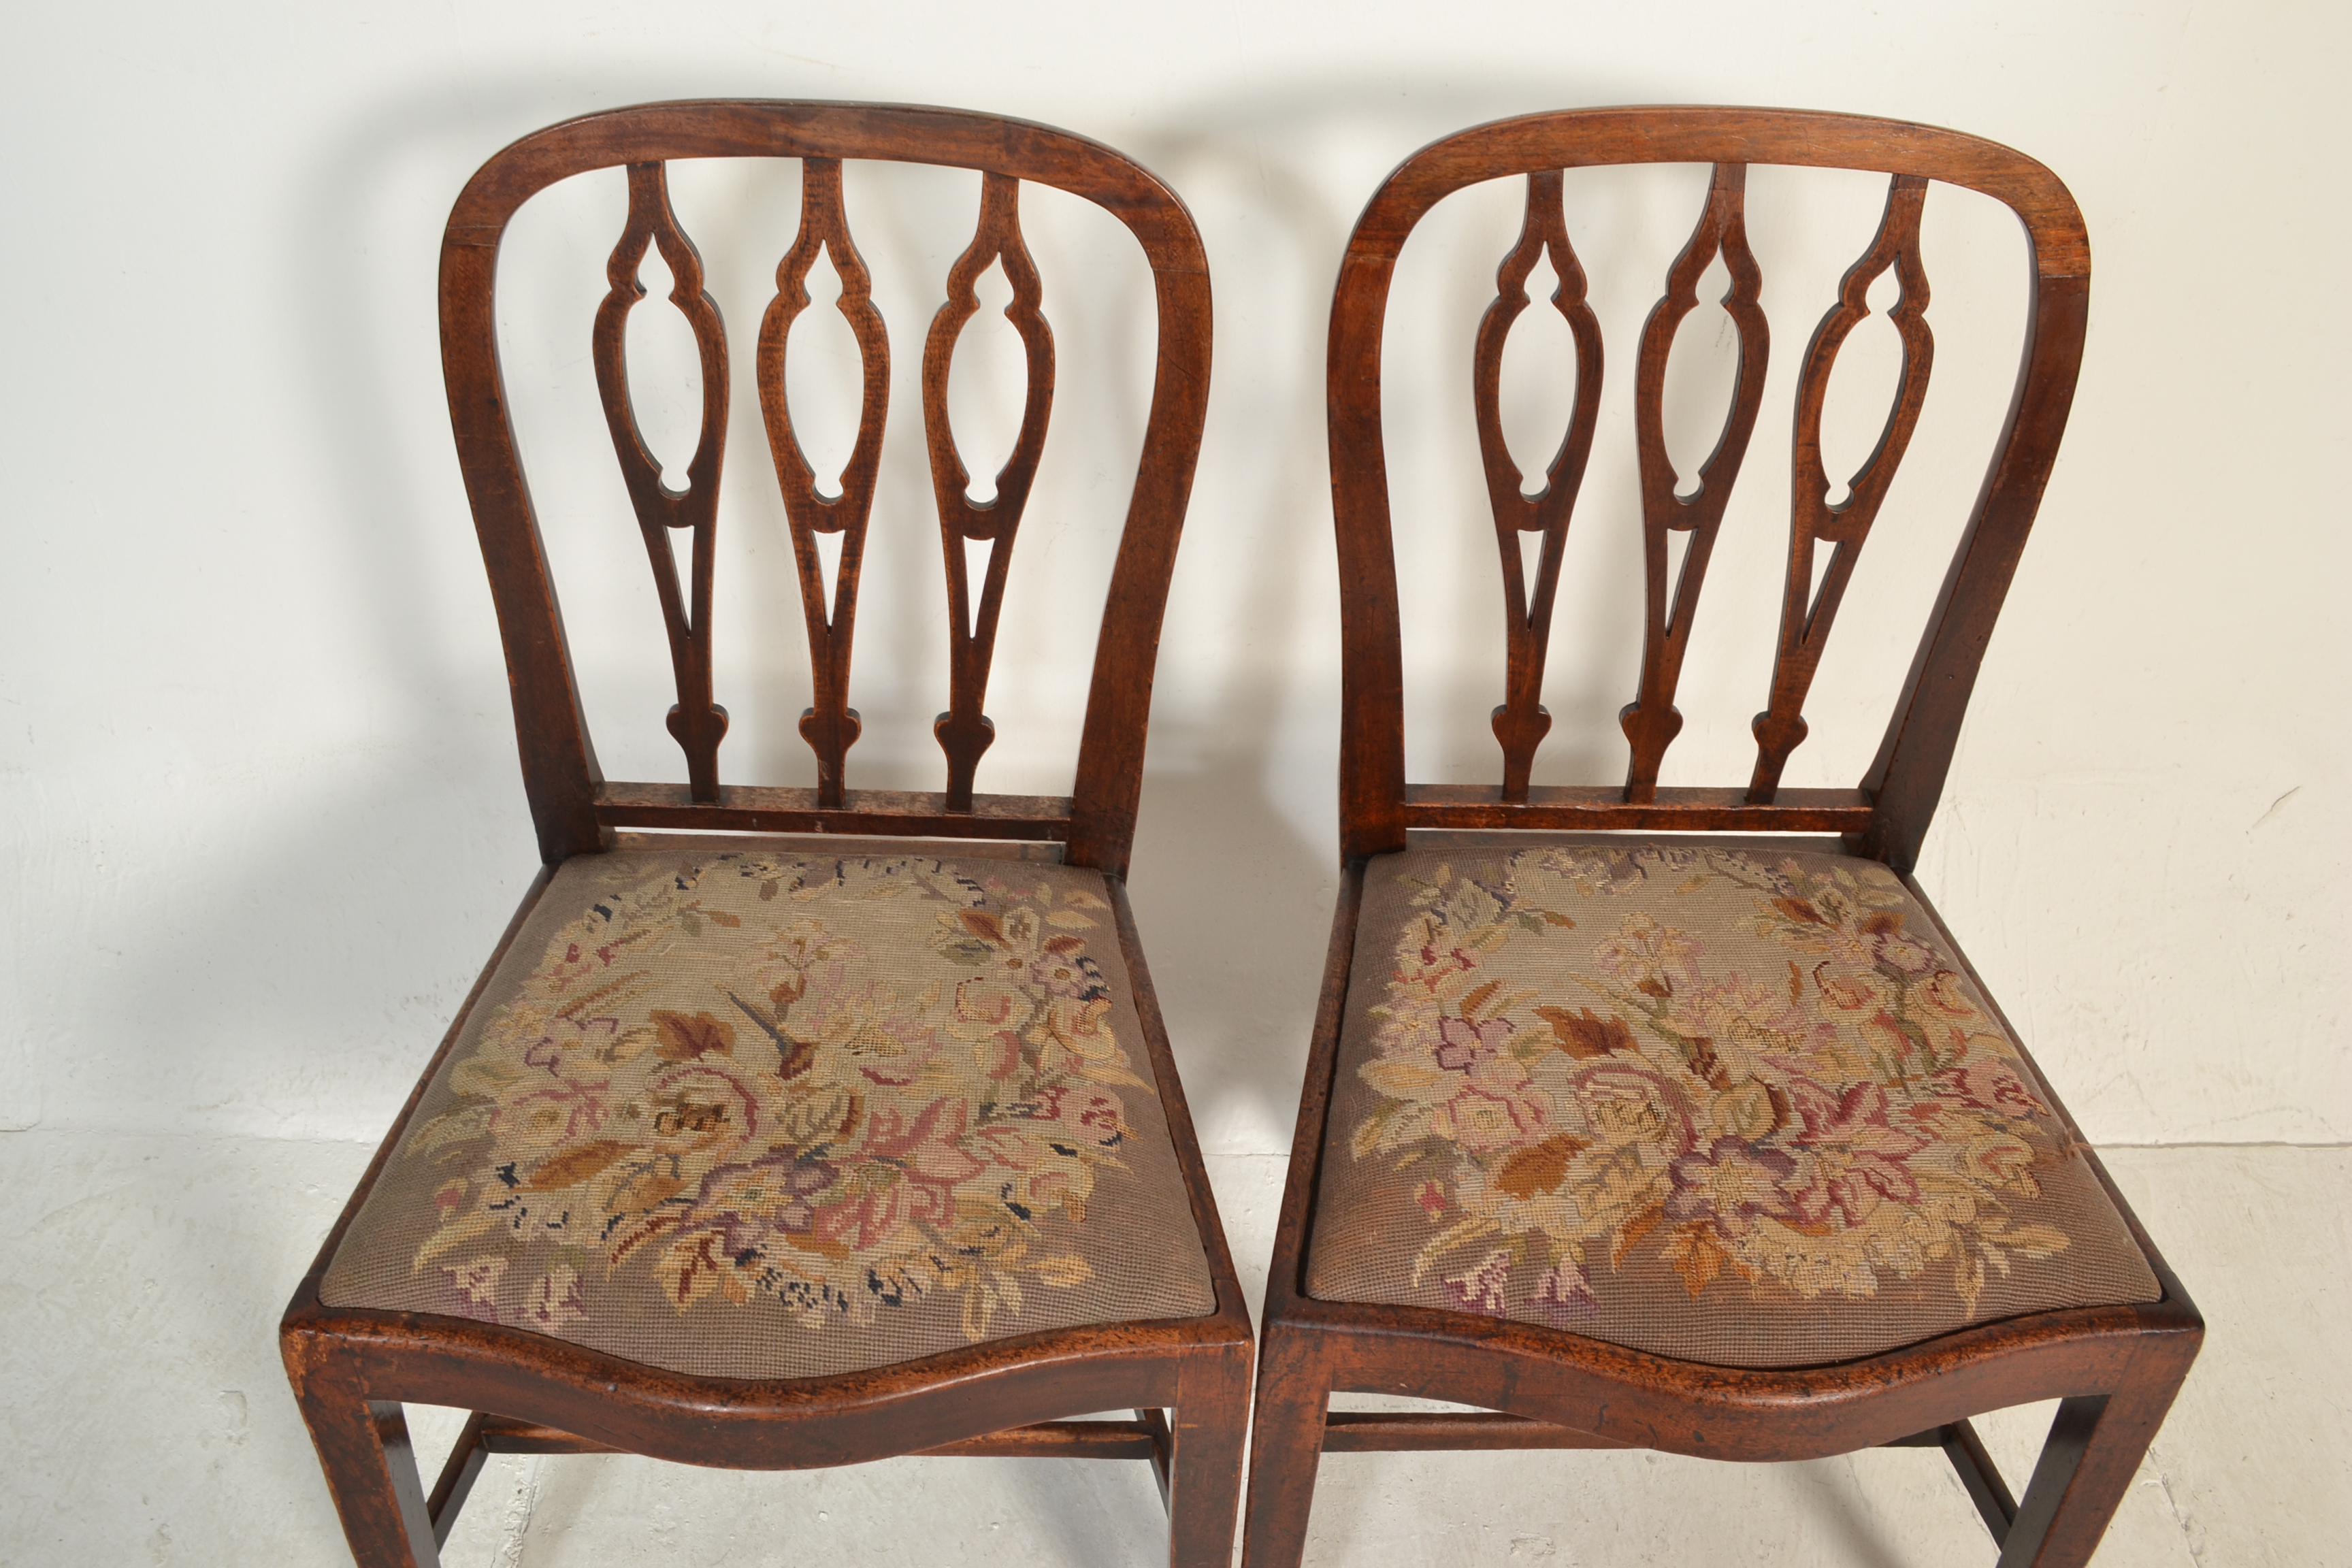 SET OF 6 19TH CENTURY GEORGE III MAHOGANY DINING CHAIRS - Image 14 of 32